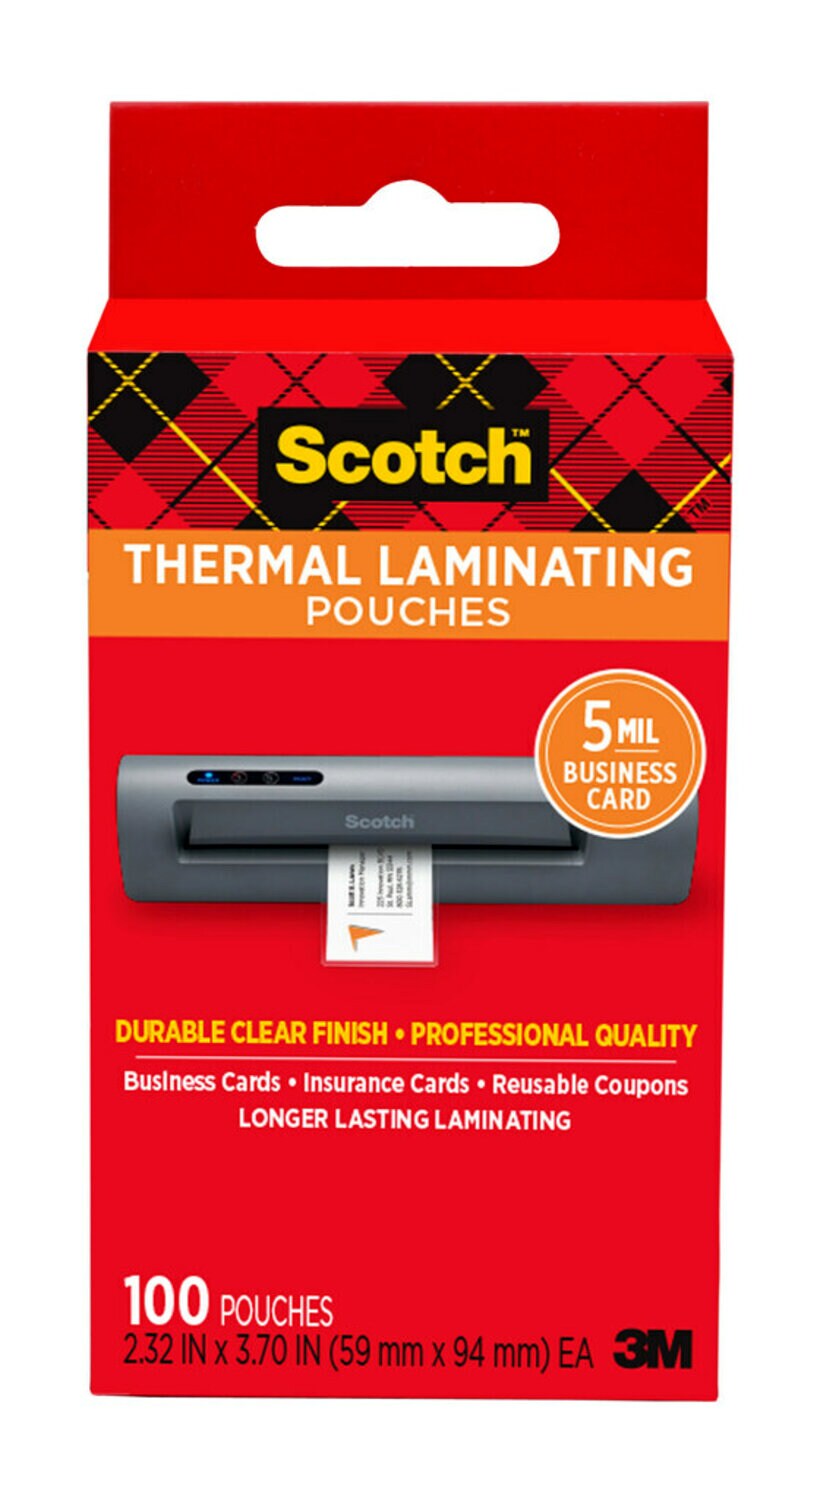 7010295089 - Scotch Thermal Pouches TP5851-100, 2.32 in x 3.70 in (59 mm x 94 mm)
Business Card 100 pack